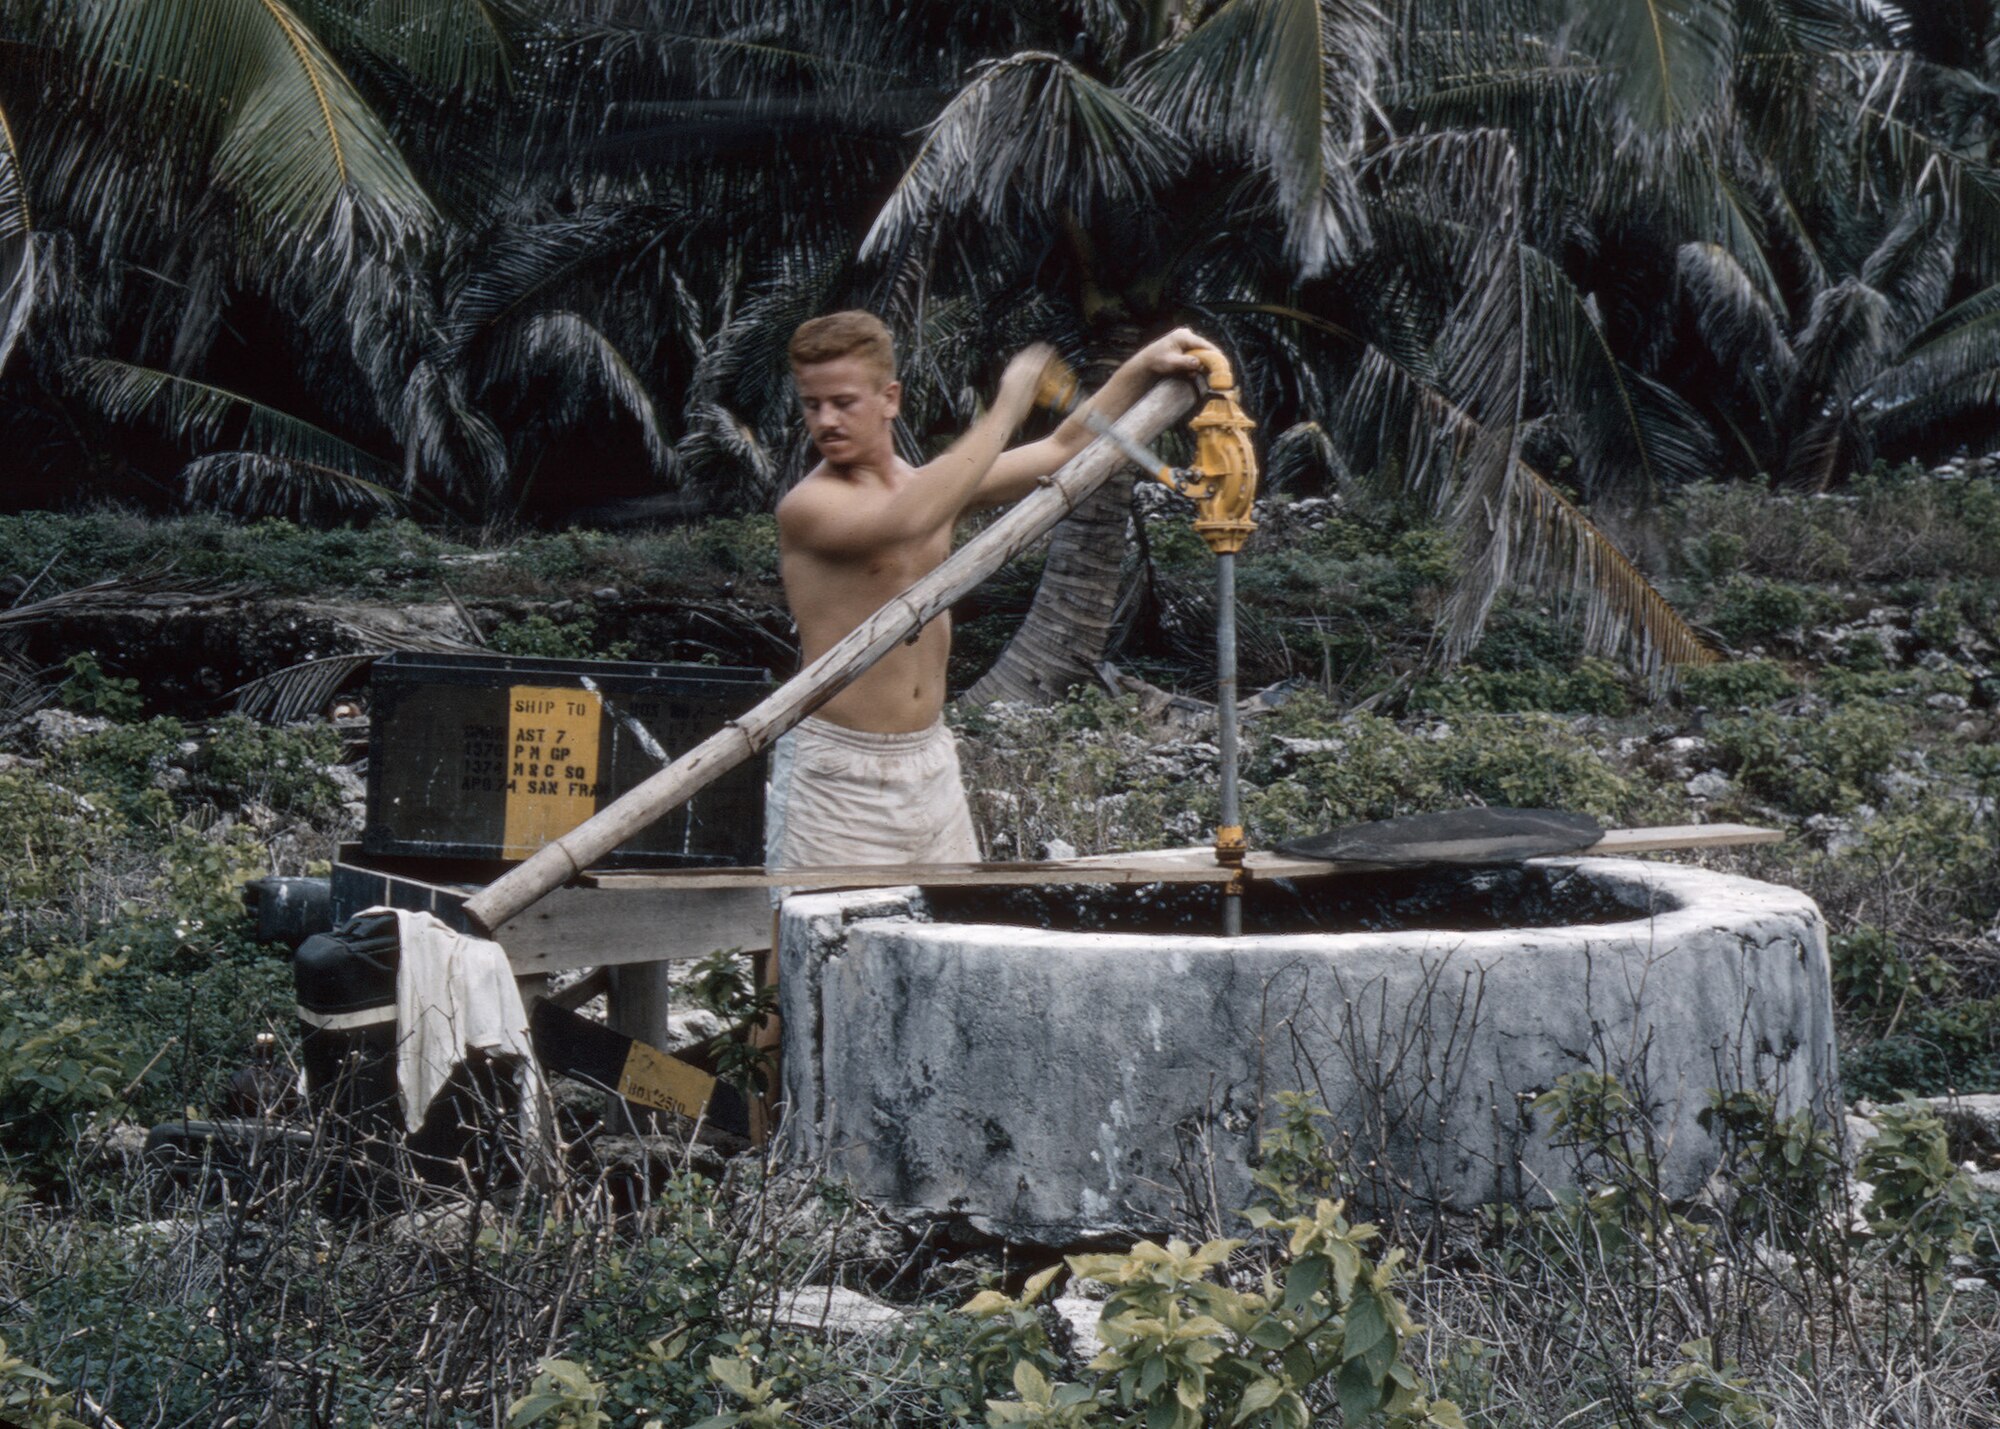 Airman 2nd Class Bob ‘Red’ Cunningham, 1374th Mapping and Charting Squadron, pumps water from an old well on North Danger Island in 1956. The Airmen only used this for laundry and washing. Drinking water was delivered in 55-gallon barrels. (Courtesy photo/Bob Cunningham)